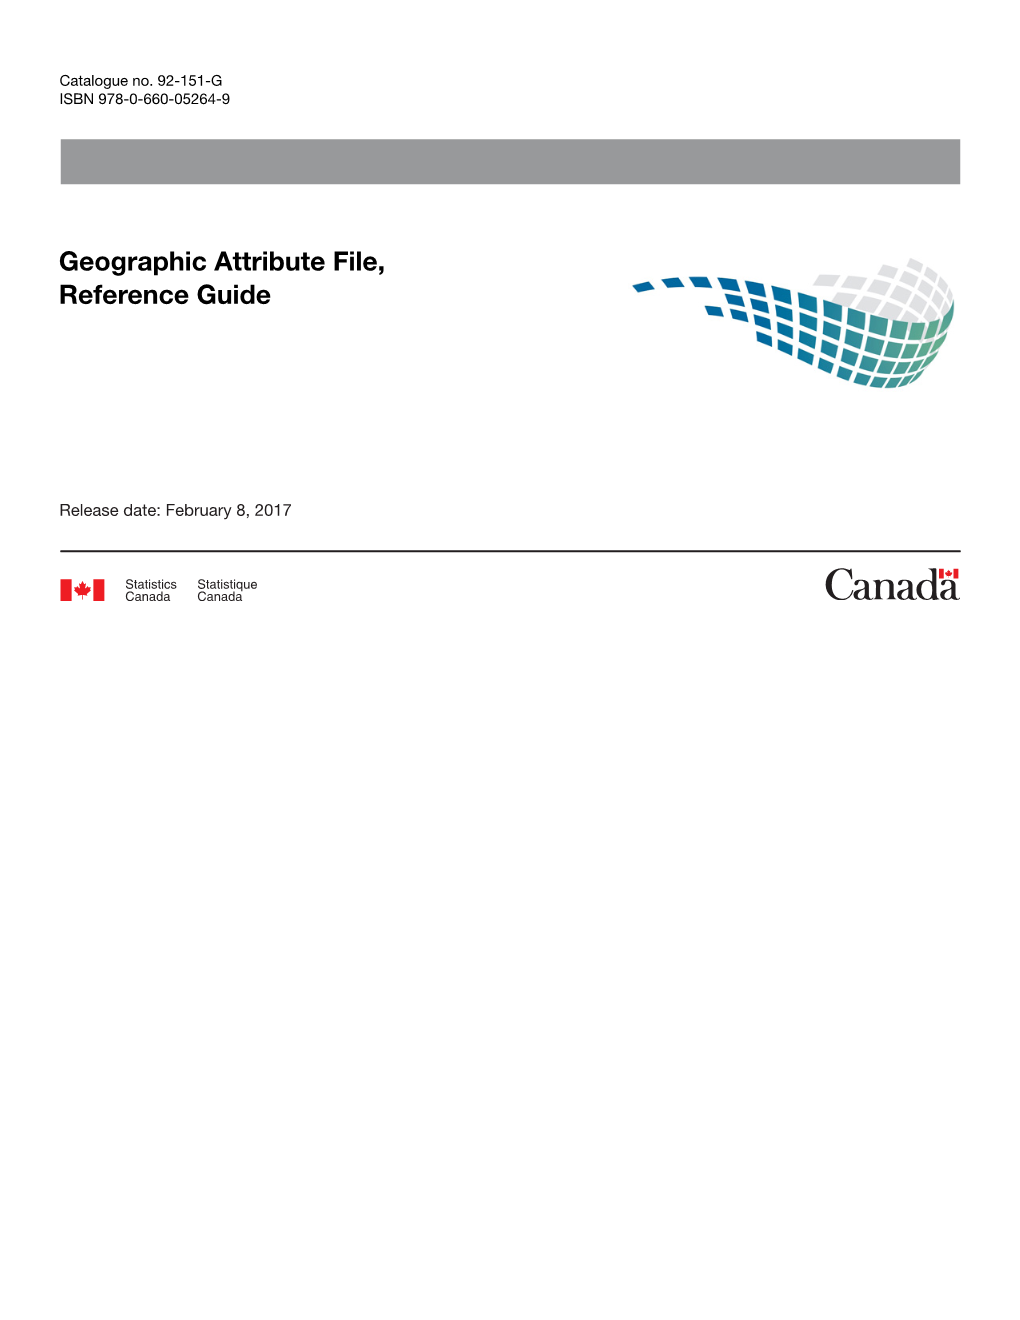 Geographic Attribute File, Reference Guide